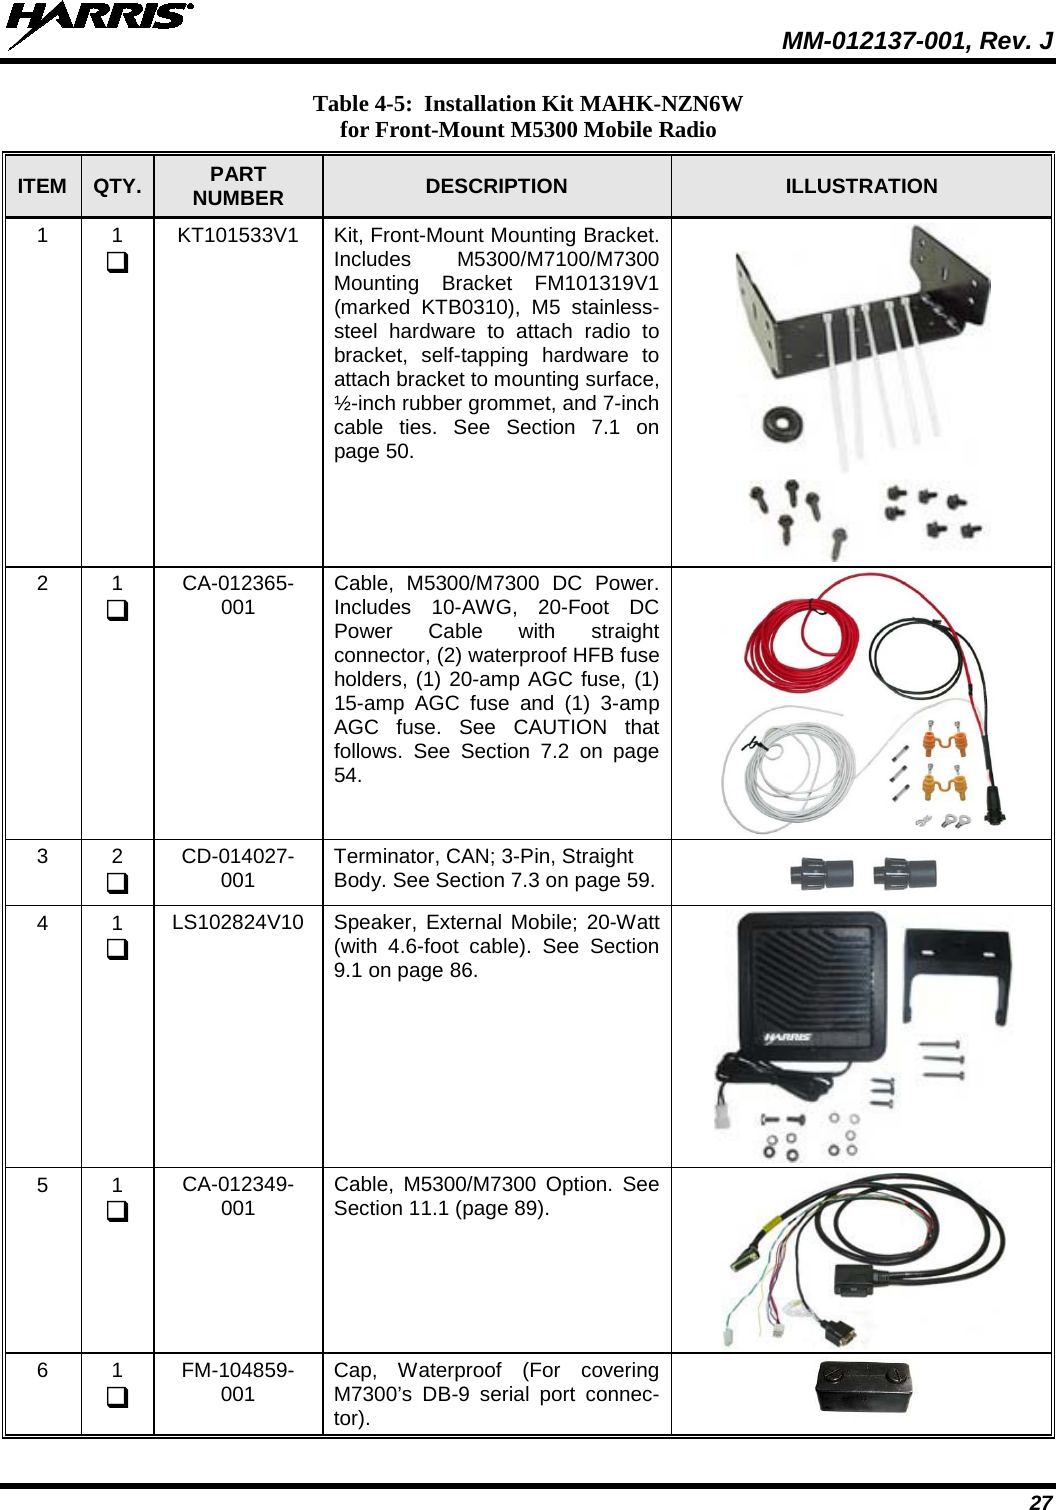  MM-012137-001, Rev. J 27 Table 4-5:  Installation Kit MAHK-NZN6W for Front-Mount M5300 Mobile Radio ITEM QTY. PART NUMBER DESCRIPTION ILLUSTRATION 1  1  KT101533V1 Kit, Front-Mount Mounting Bracket. Includes  M5300/M7100/M7300 Mounting Bracket FM101319V1 (marked KTB0310), M5 stainless-steel hardware to attach radio to bracket, self-tapping hardware to attach bracket to mounting surface, ½-inch rubber grommet, and 7-inch cable ties. See Section 7.1 on page 50.  2  1  CA-012365-001 Cable,  M5300/M7300 DC Power. Includes 10-AWG, 20-Foot DC Power Cable with straight connector, (2) waterproof HFB fuse holders, (1) 20-amp AGC fuse, (1) 15-amp AGC fuse and (1) 3-amp AGC fuse. See CAUTION that follows. See Section 7.2 on page 54.  3  2  CD-014027-001 Terminator, CAN; 3-Pin, Straight Body. See Section 7.3 on page 59.       4  1  LS102824V10 Speaker, External Mobile; 20-Watt (with 4.6-foot cable).  See Section 9.1 on page 86.  5  1  CA-012349-001 Cable,  M5300/M7300 Option. See Section 11.1 (page 89).  6  1  FM-104859-001 Cap, Waterproof (For covering M7300’s  DB-9 serial port connec-tor).    